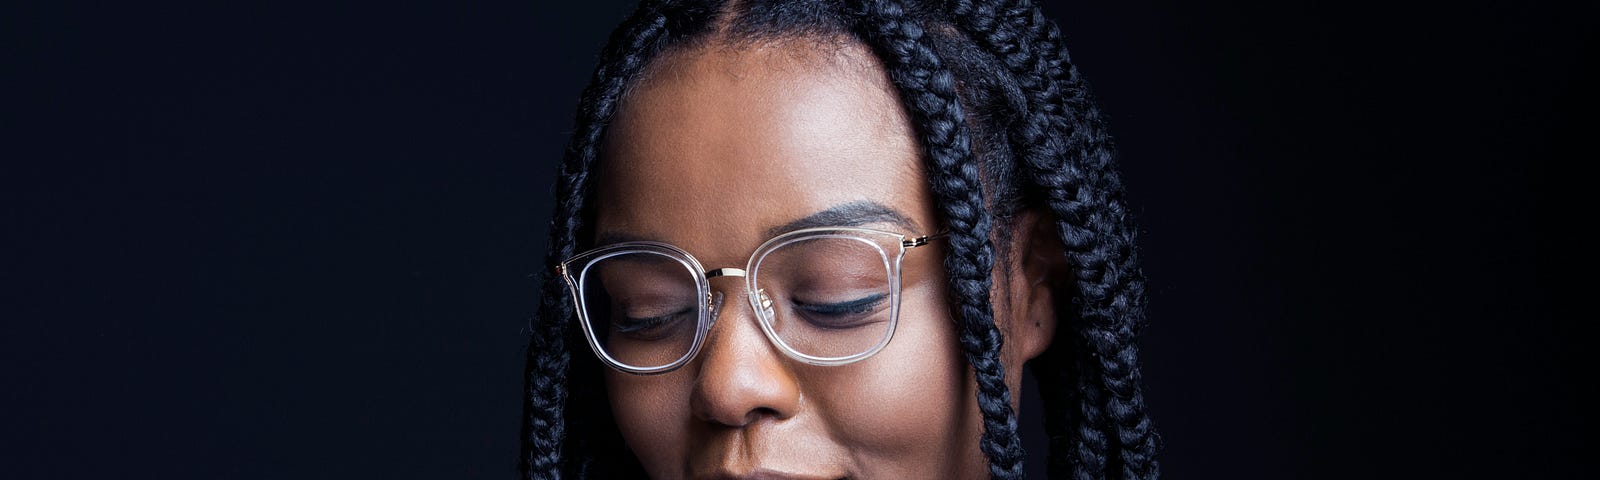 Black woman with braided hair wearing glasses and looking down.